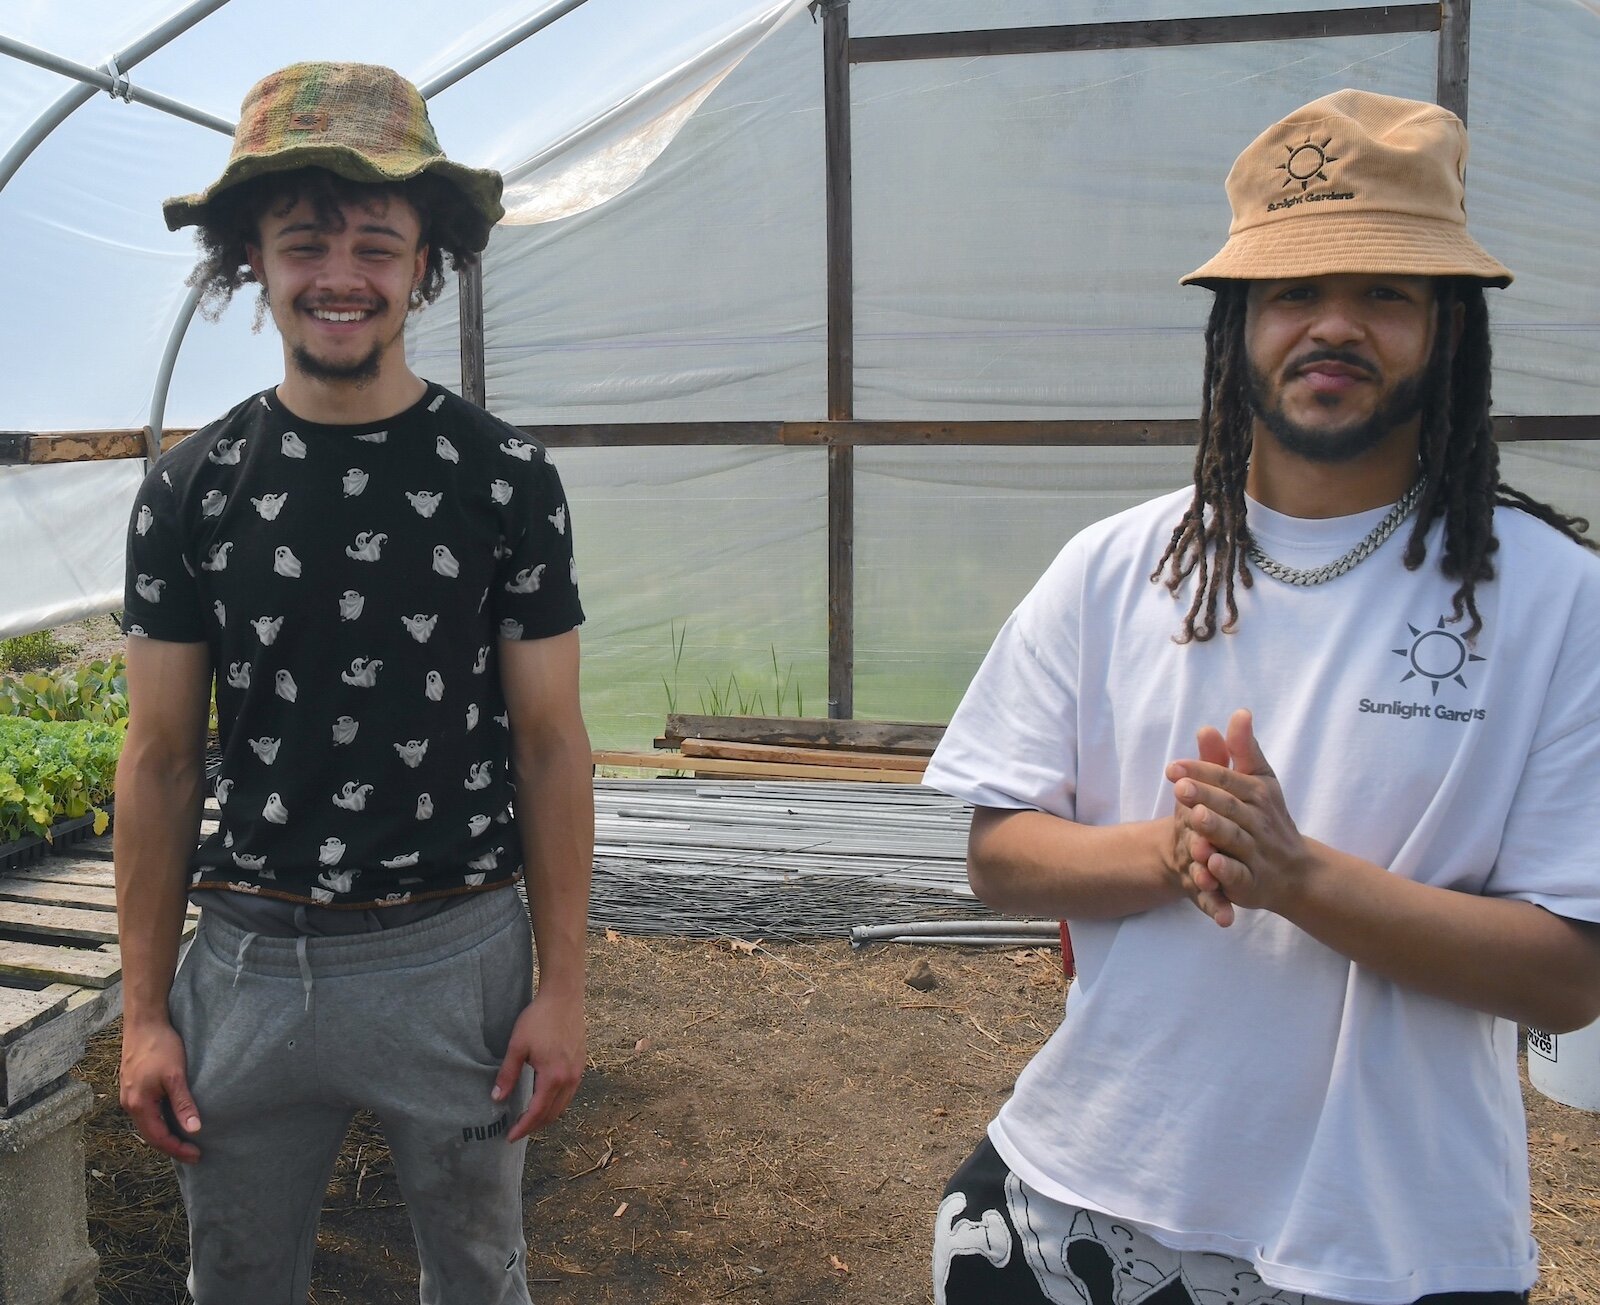 Devon Wilson, right, and Jerry Olds pose for photos inside a hoop house at Sunlight Gardens.